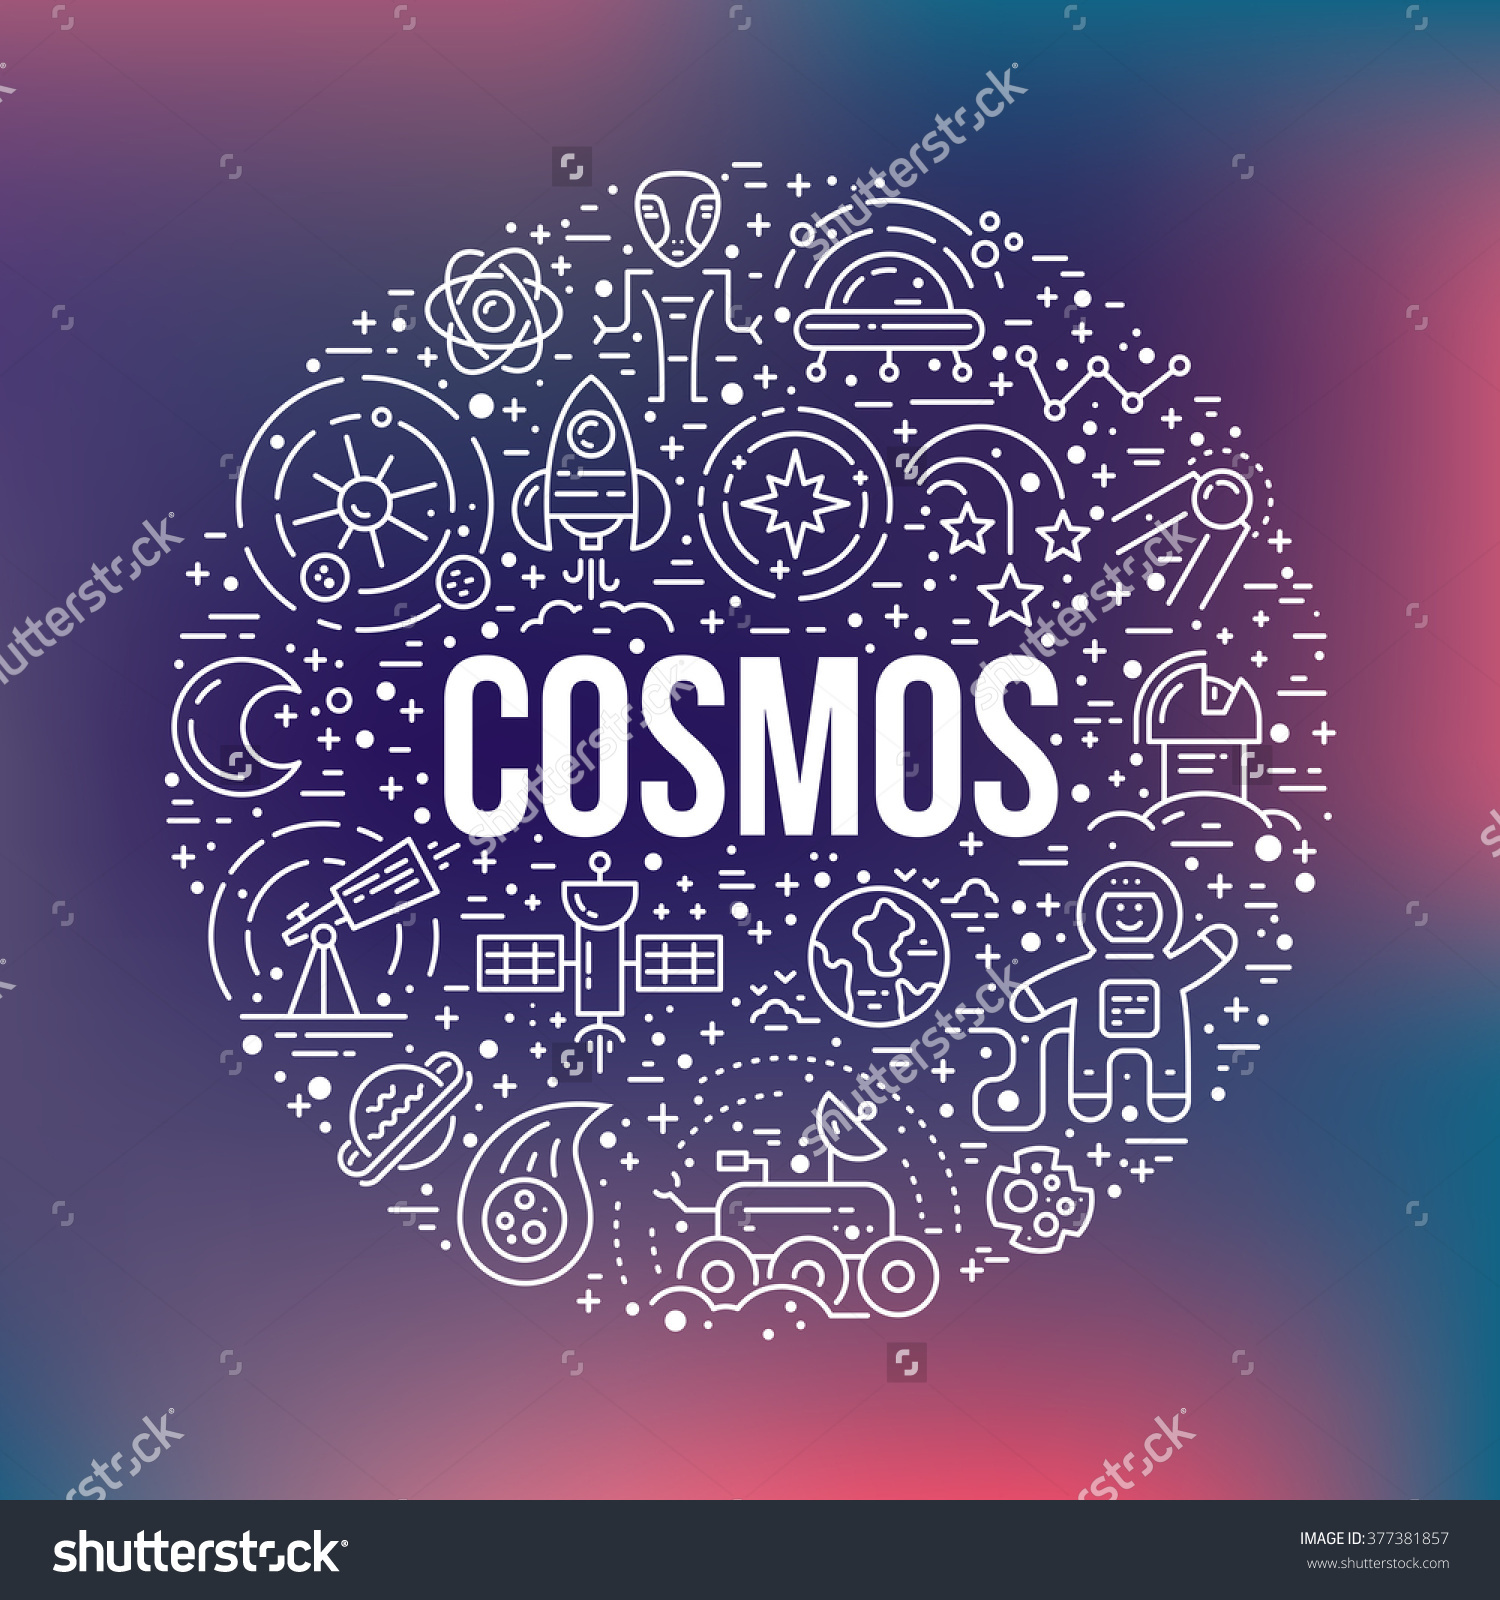 Cosmos clipart #2, Download drawings